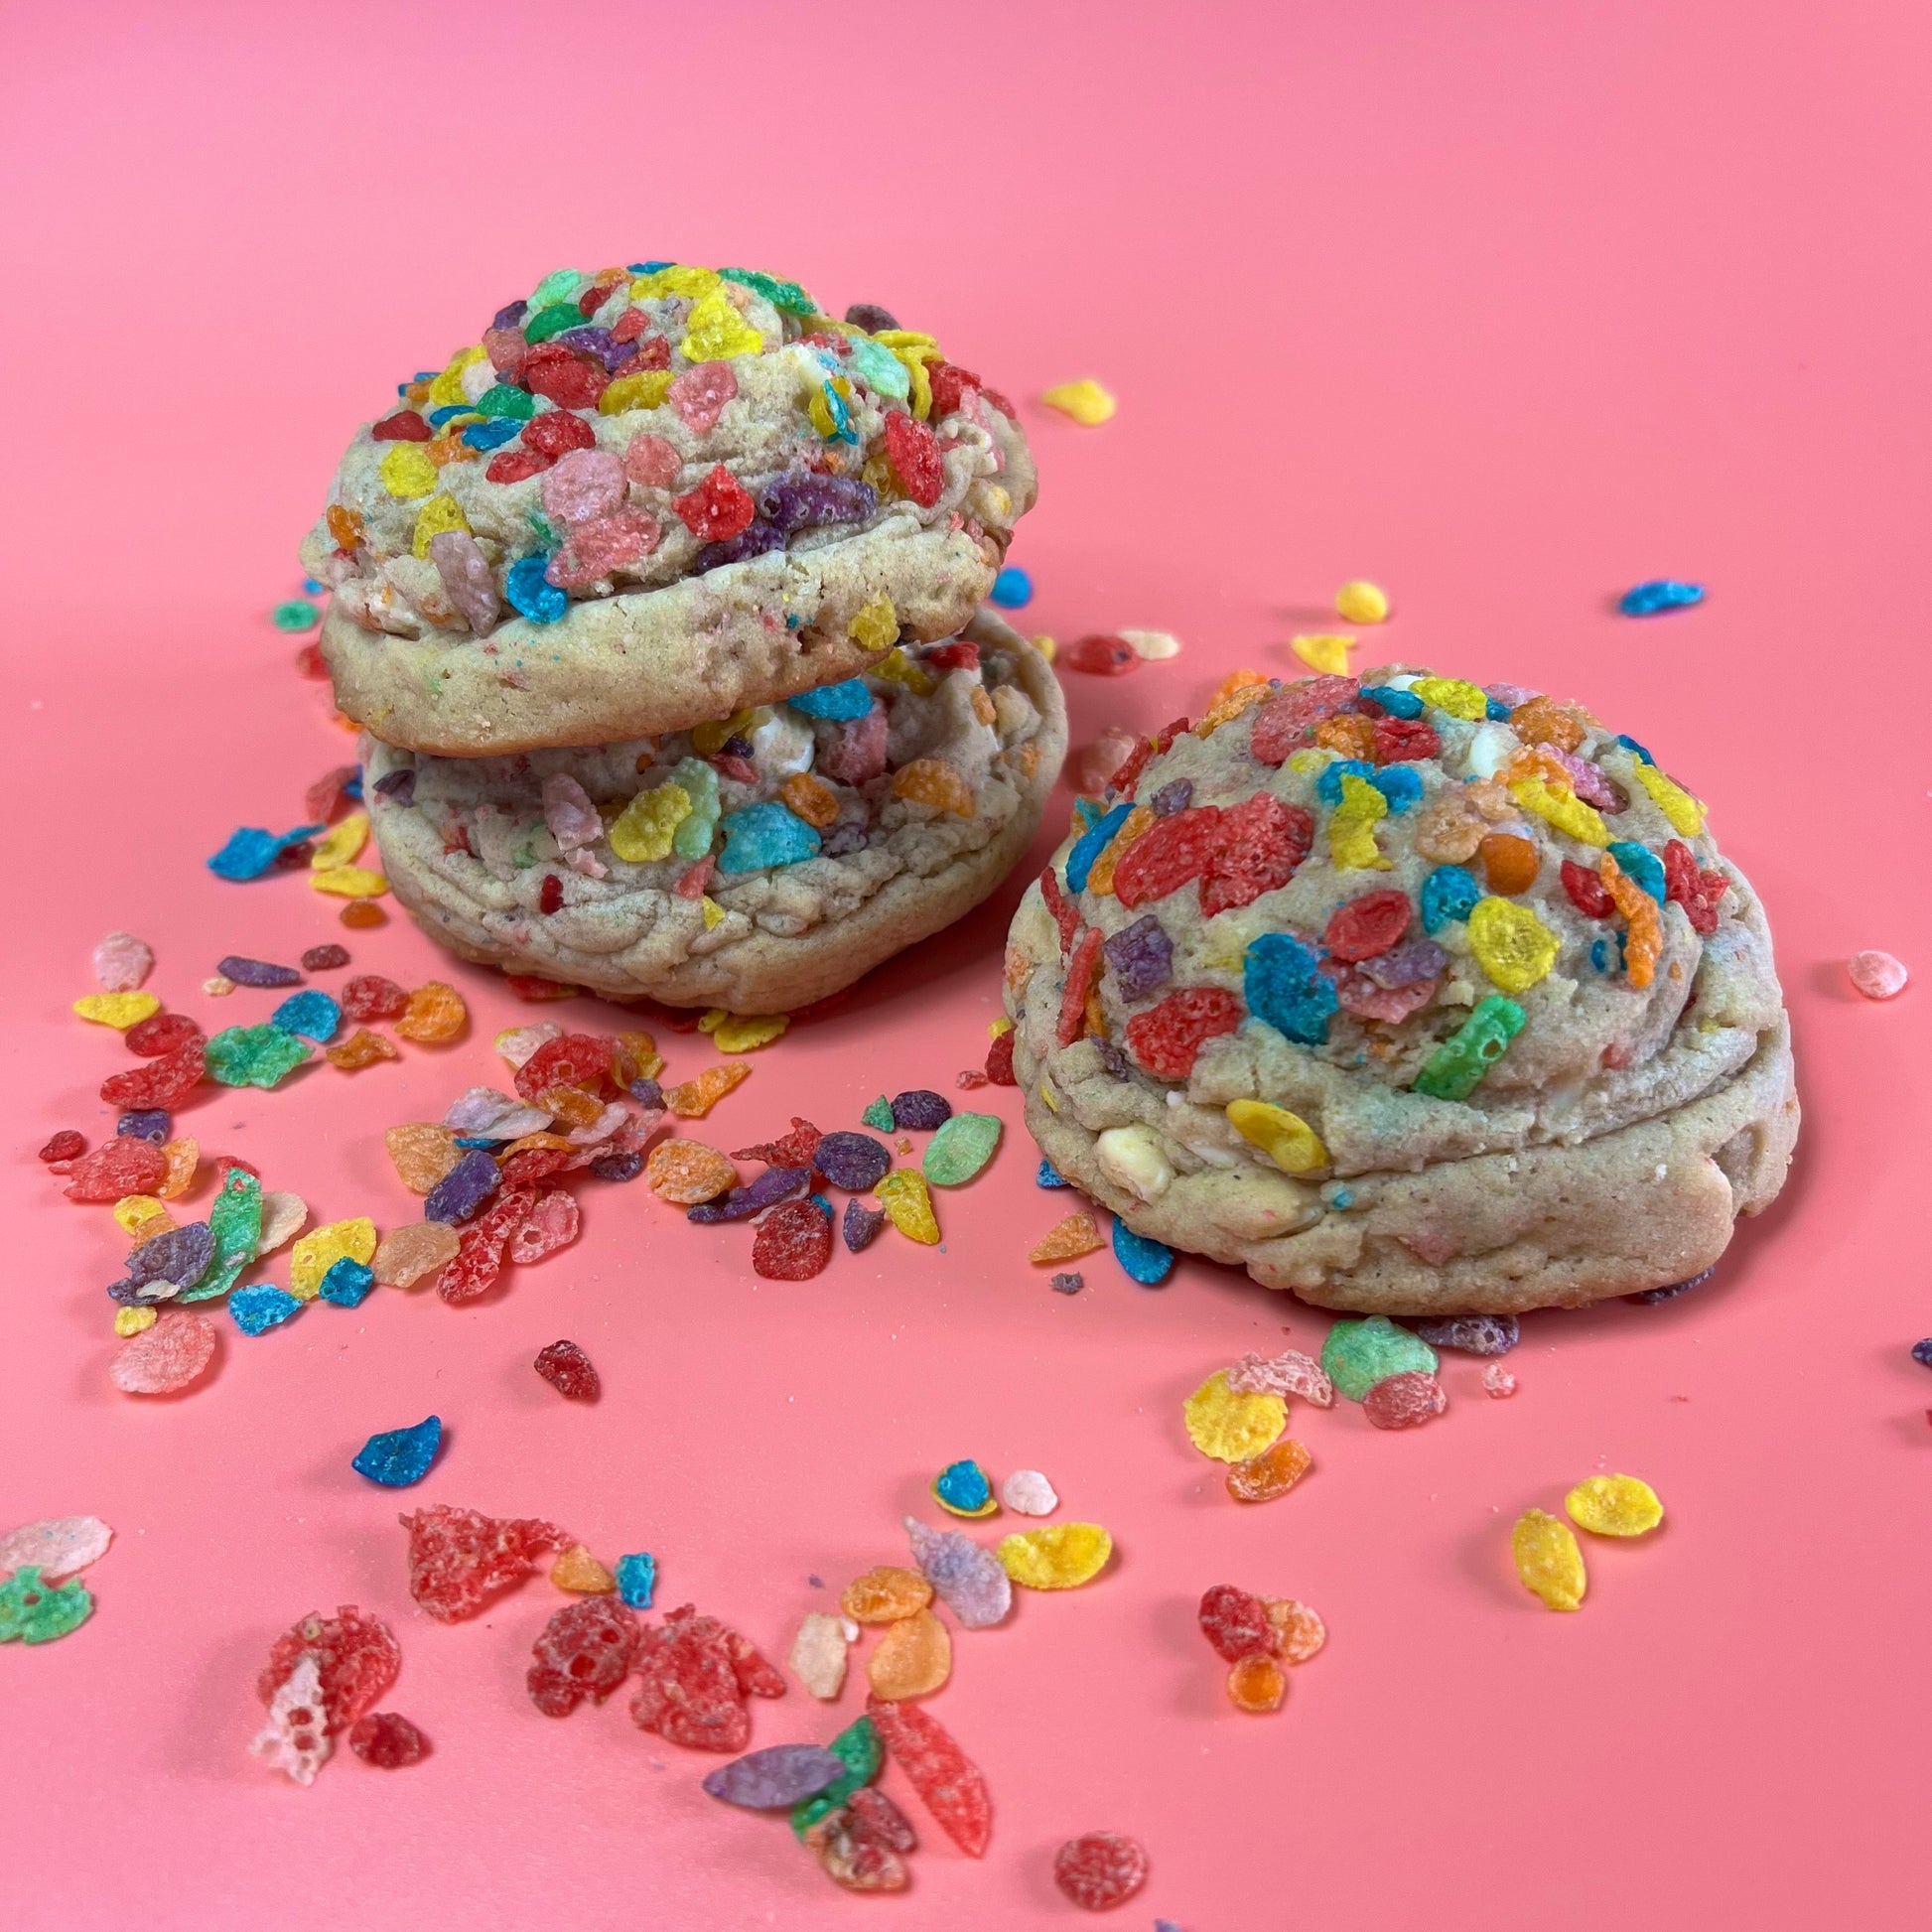 A classic sugar cookie dough with Fruity Pebble cereal.